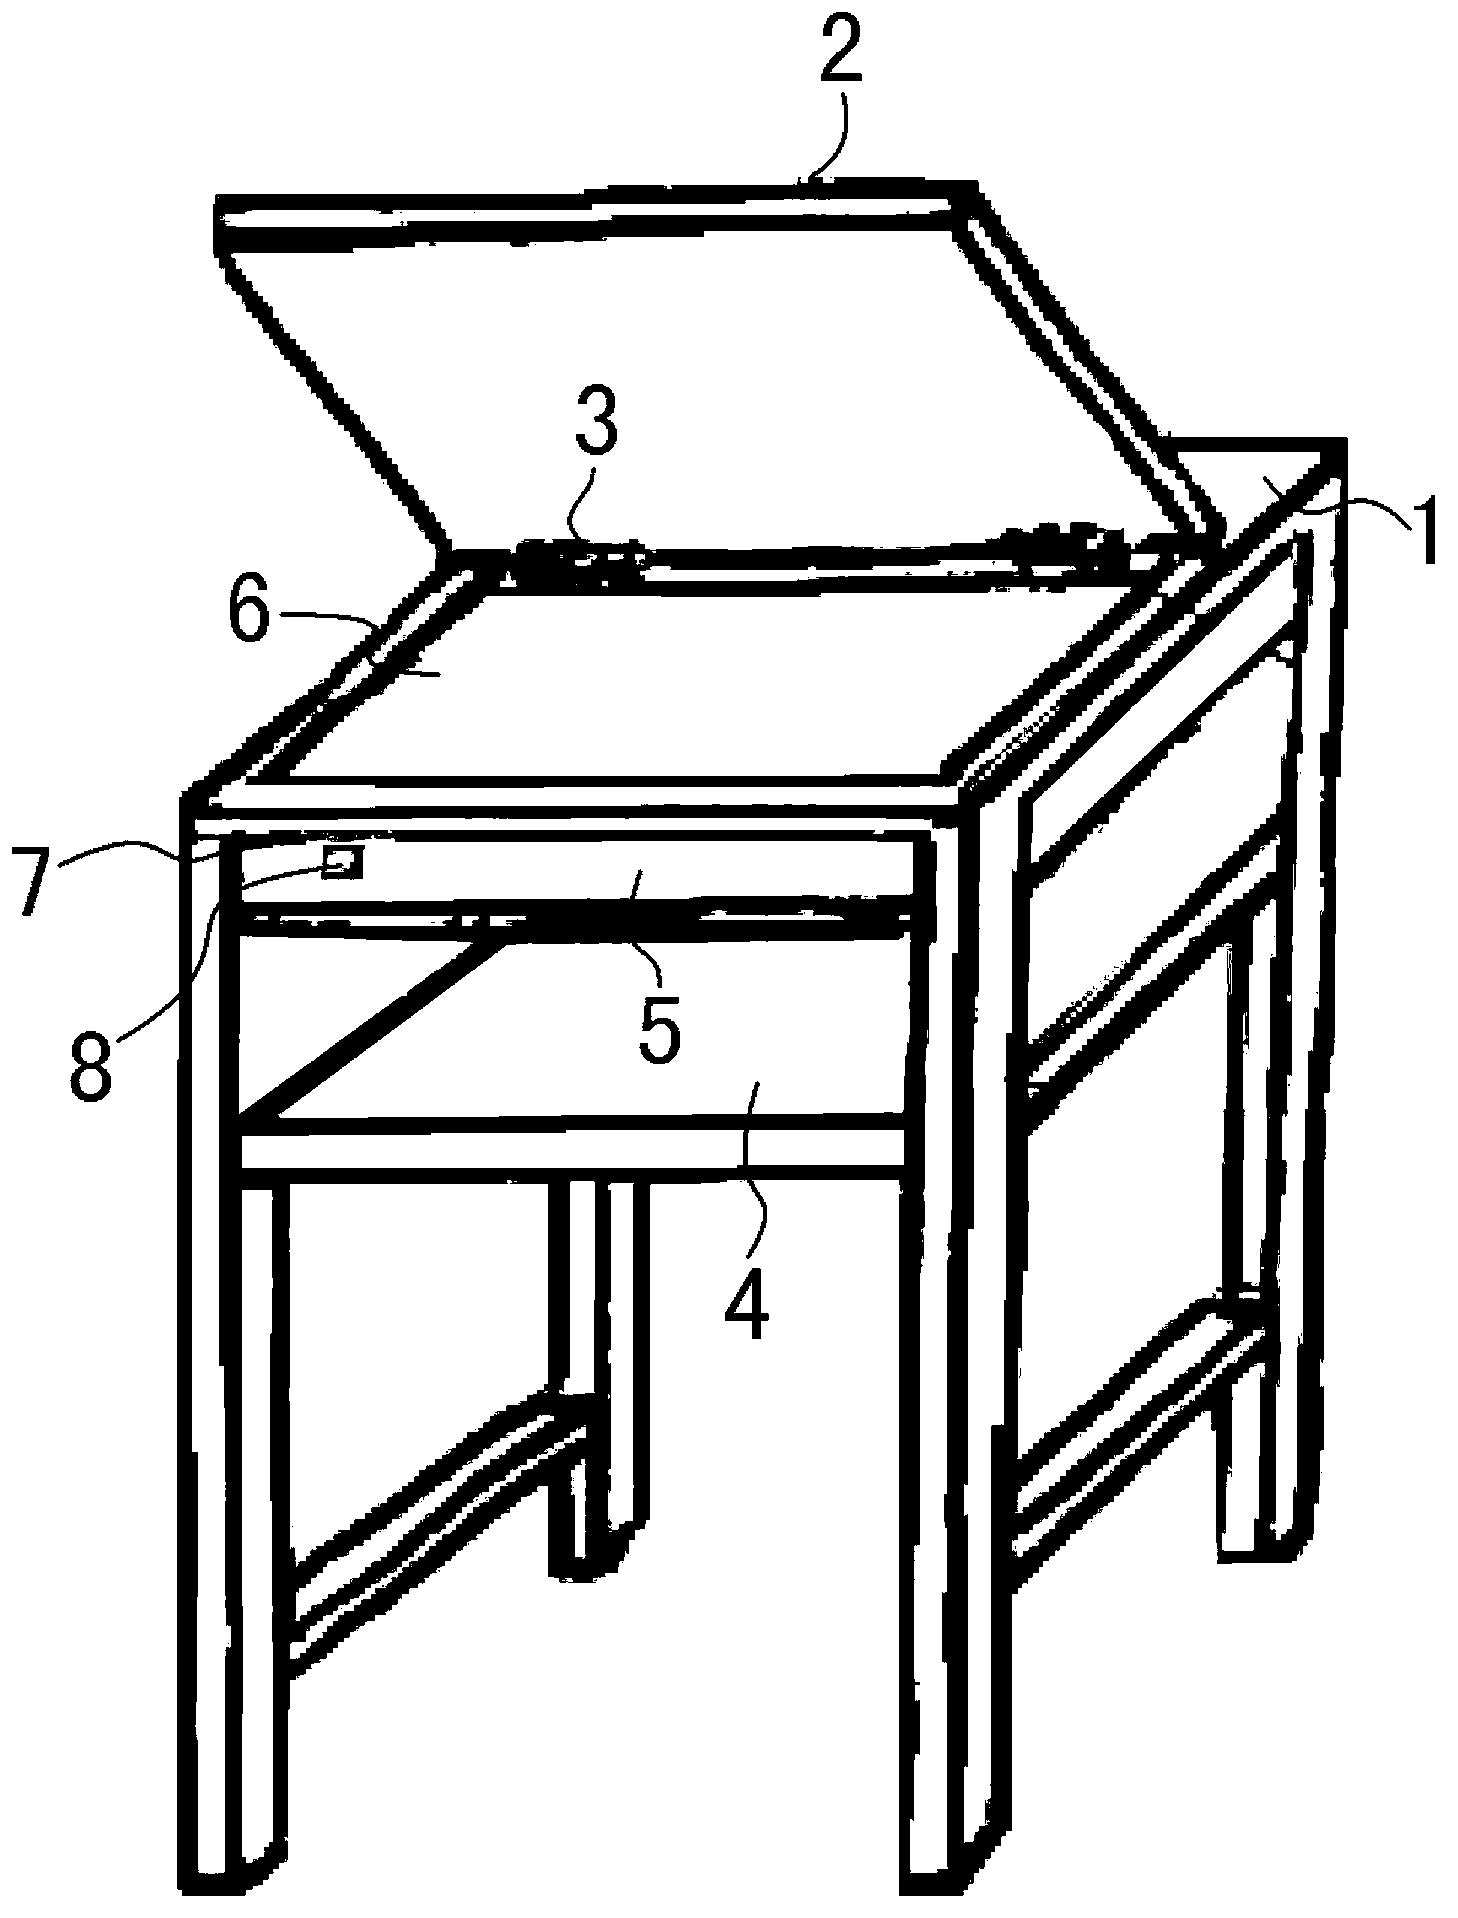 Desk for tracing over red characters